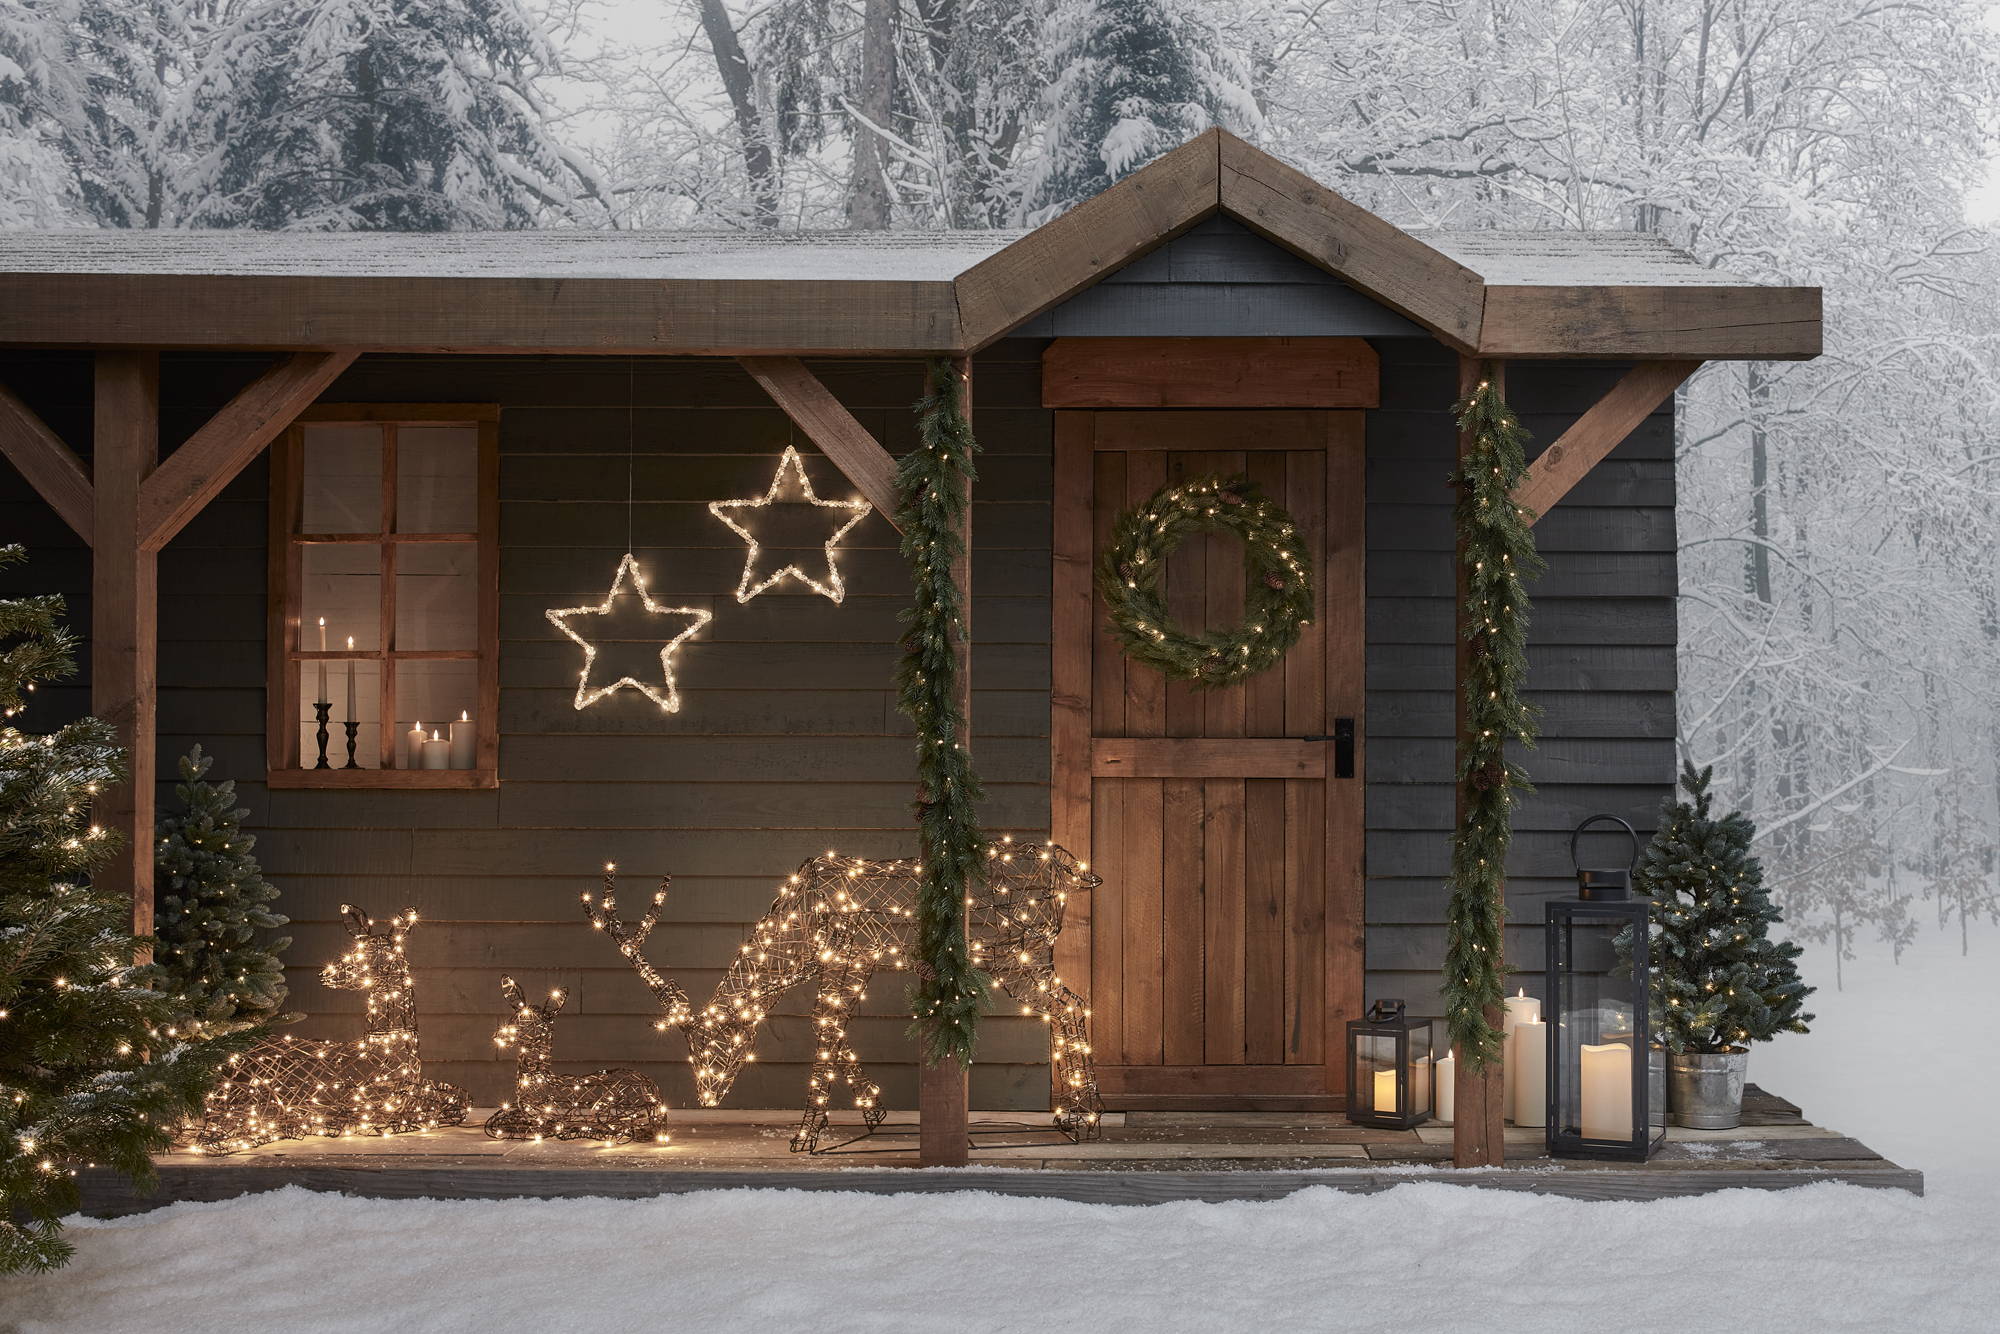 A winter wonderland setting with light up reindeer around a cottage.